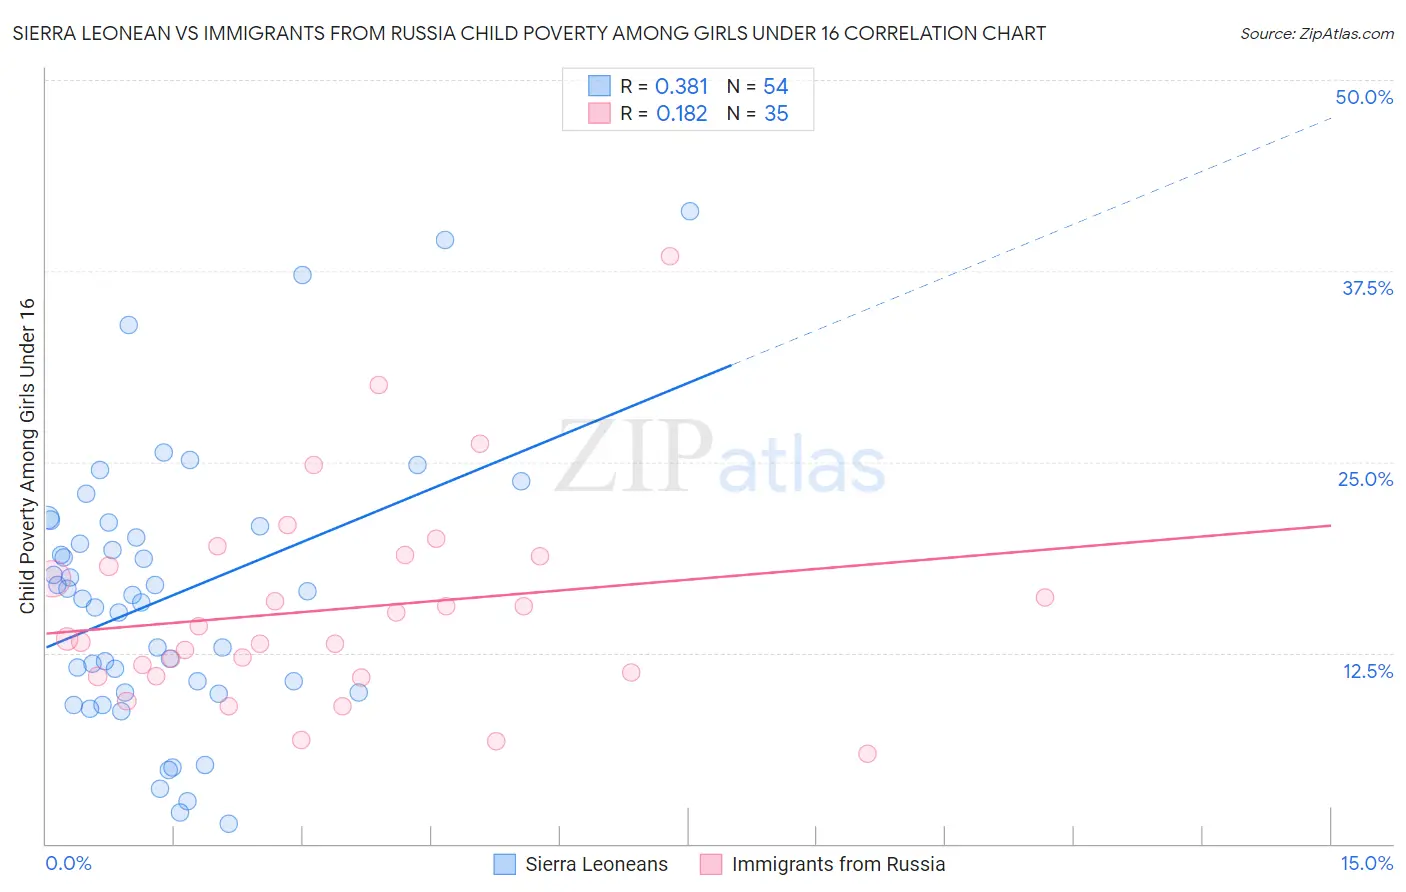 Sierra Leonean vs Immigrants from Russia Child Poverty Among Girls Under 16